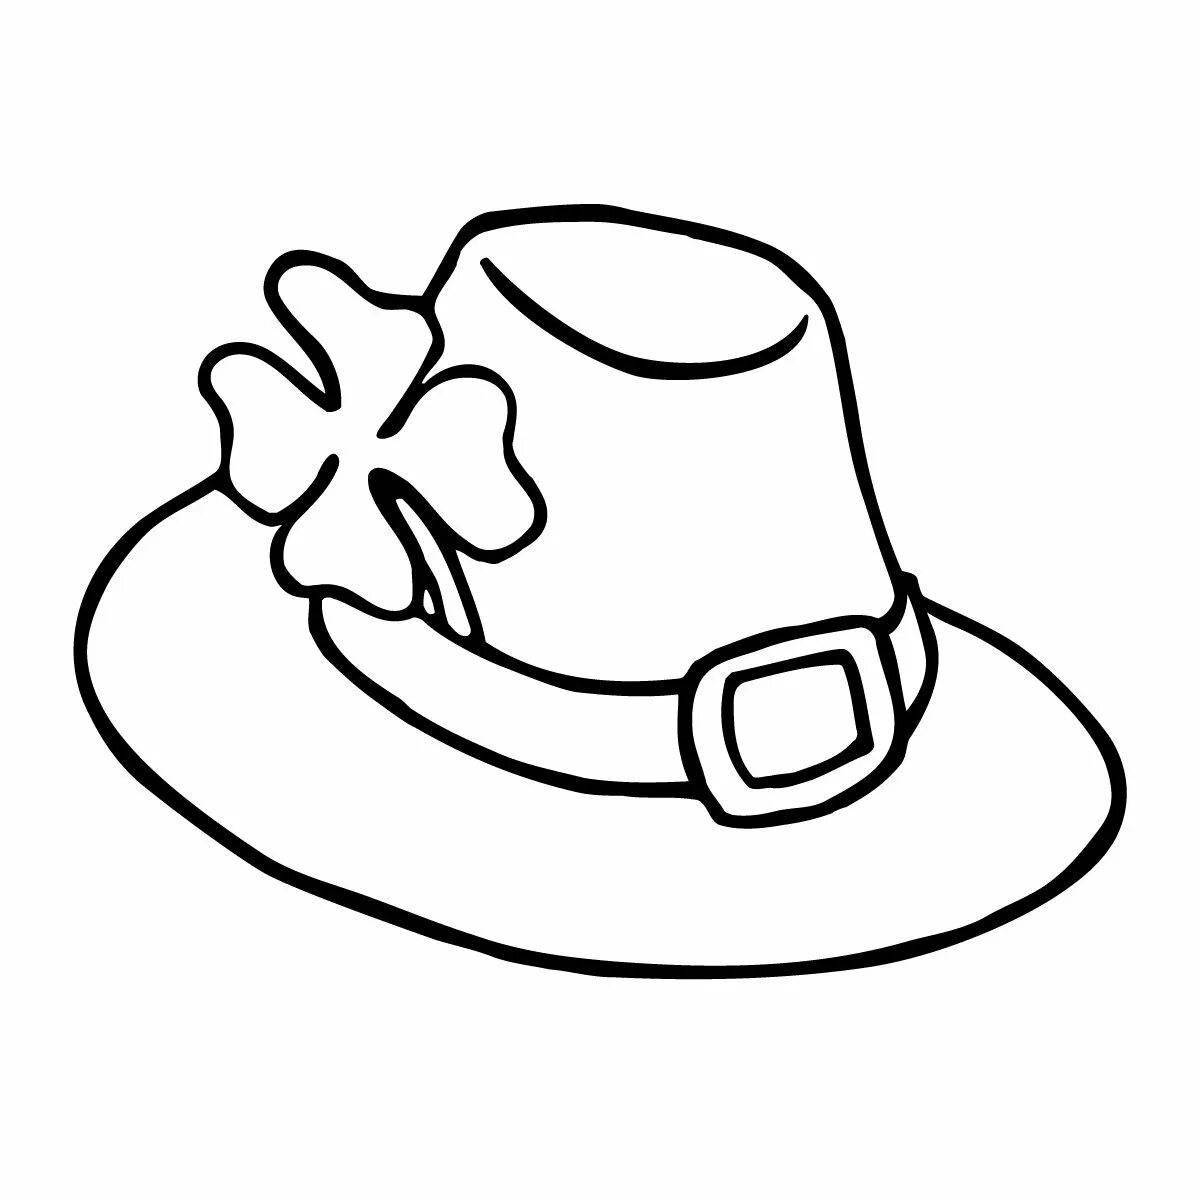 Attractive live hat coloring page